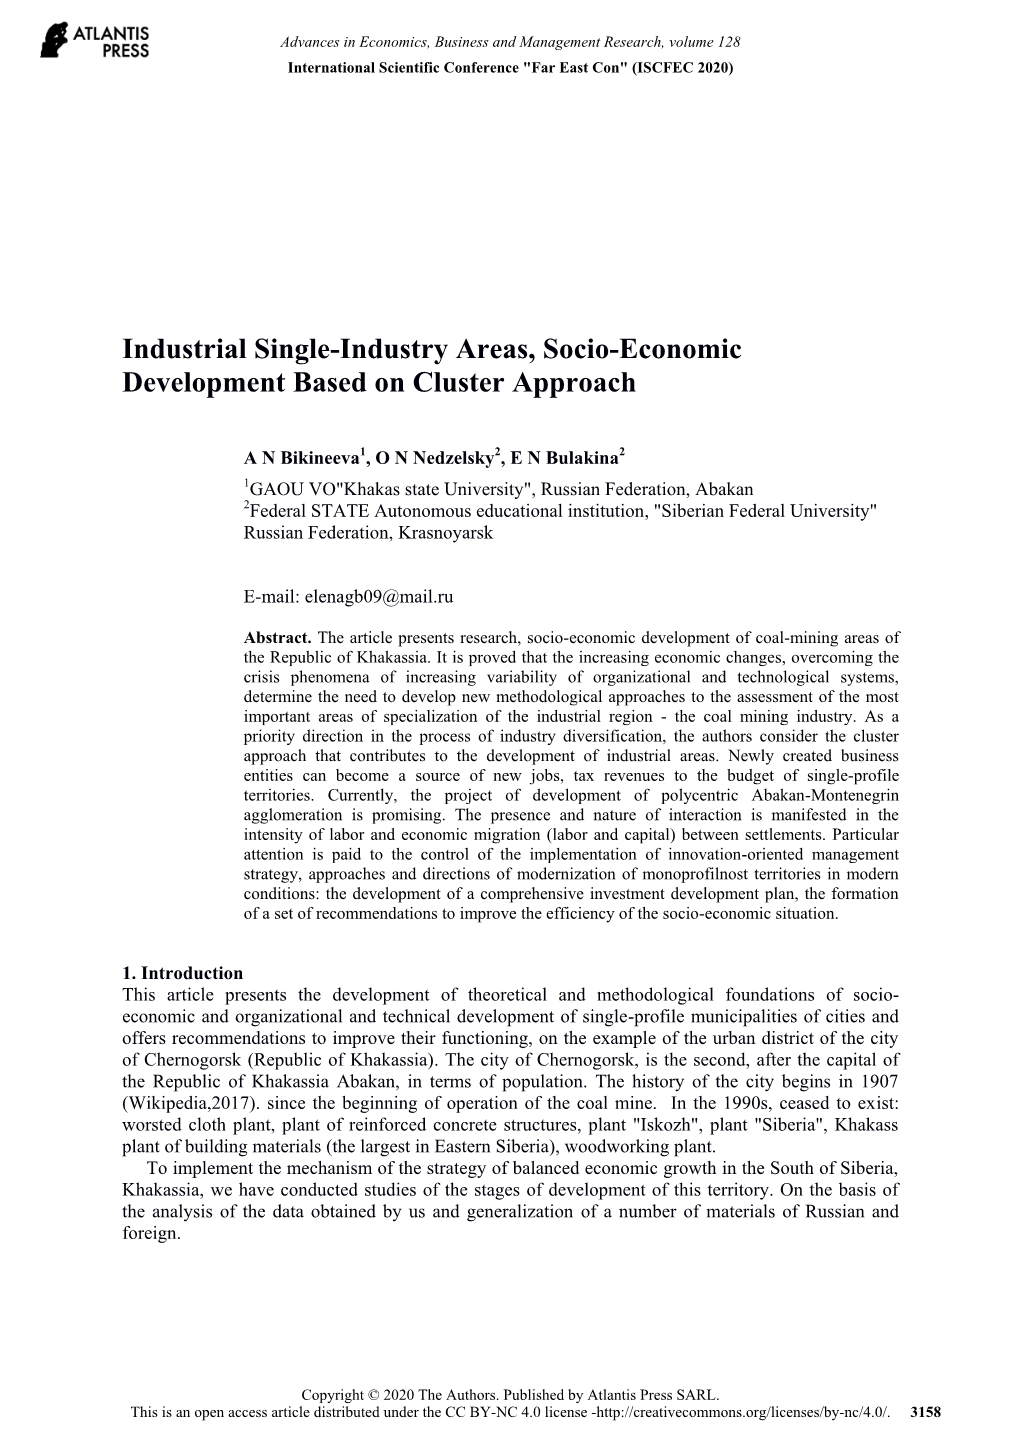 Industrial Single-Industry Areas, Socio-Economic Development Based on Cluster Approach